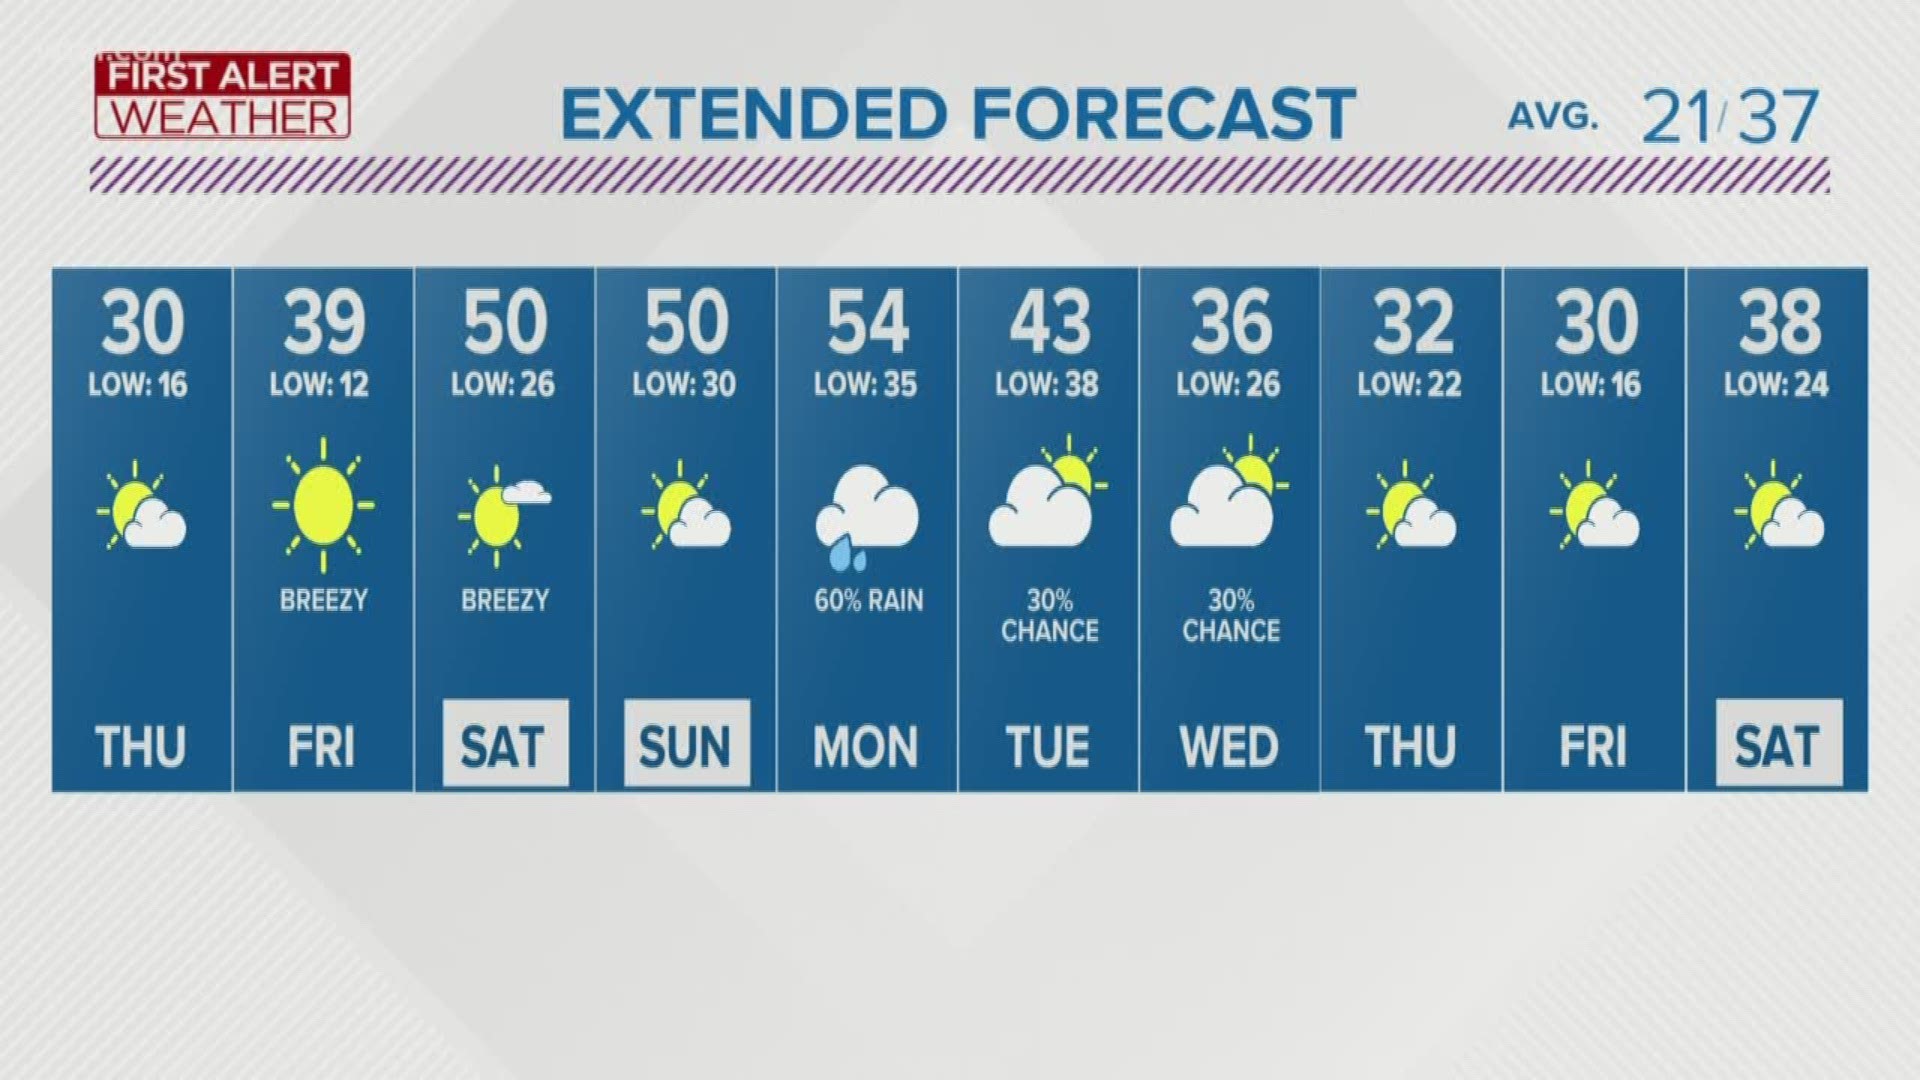 Brilliant sunshine rules through the end of the week. Spring Fever with highs near 50° this weekend.